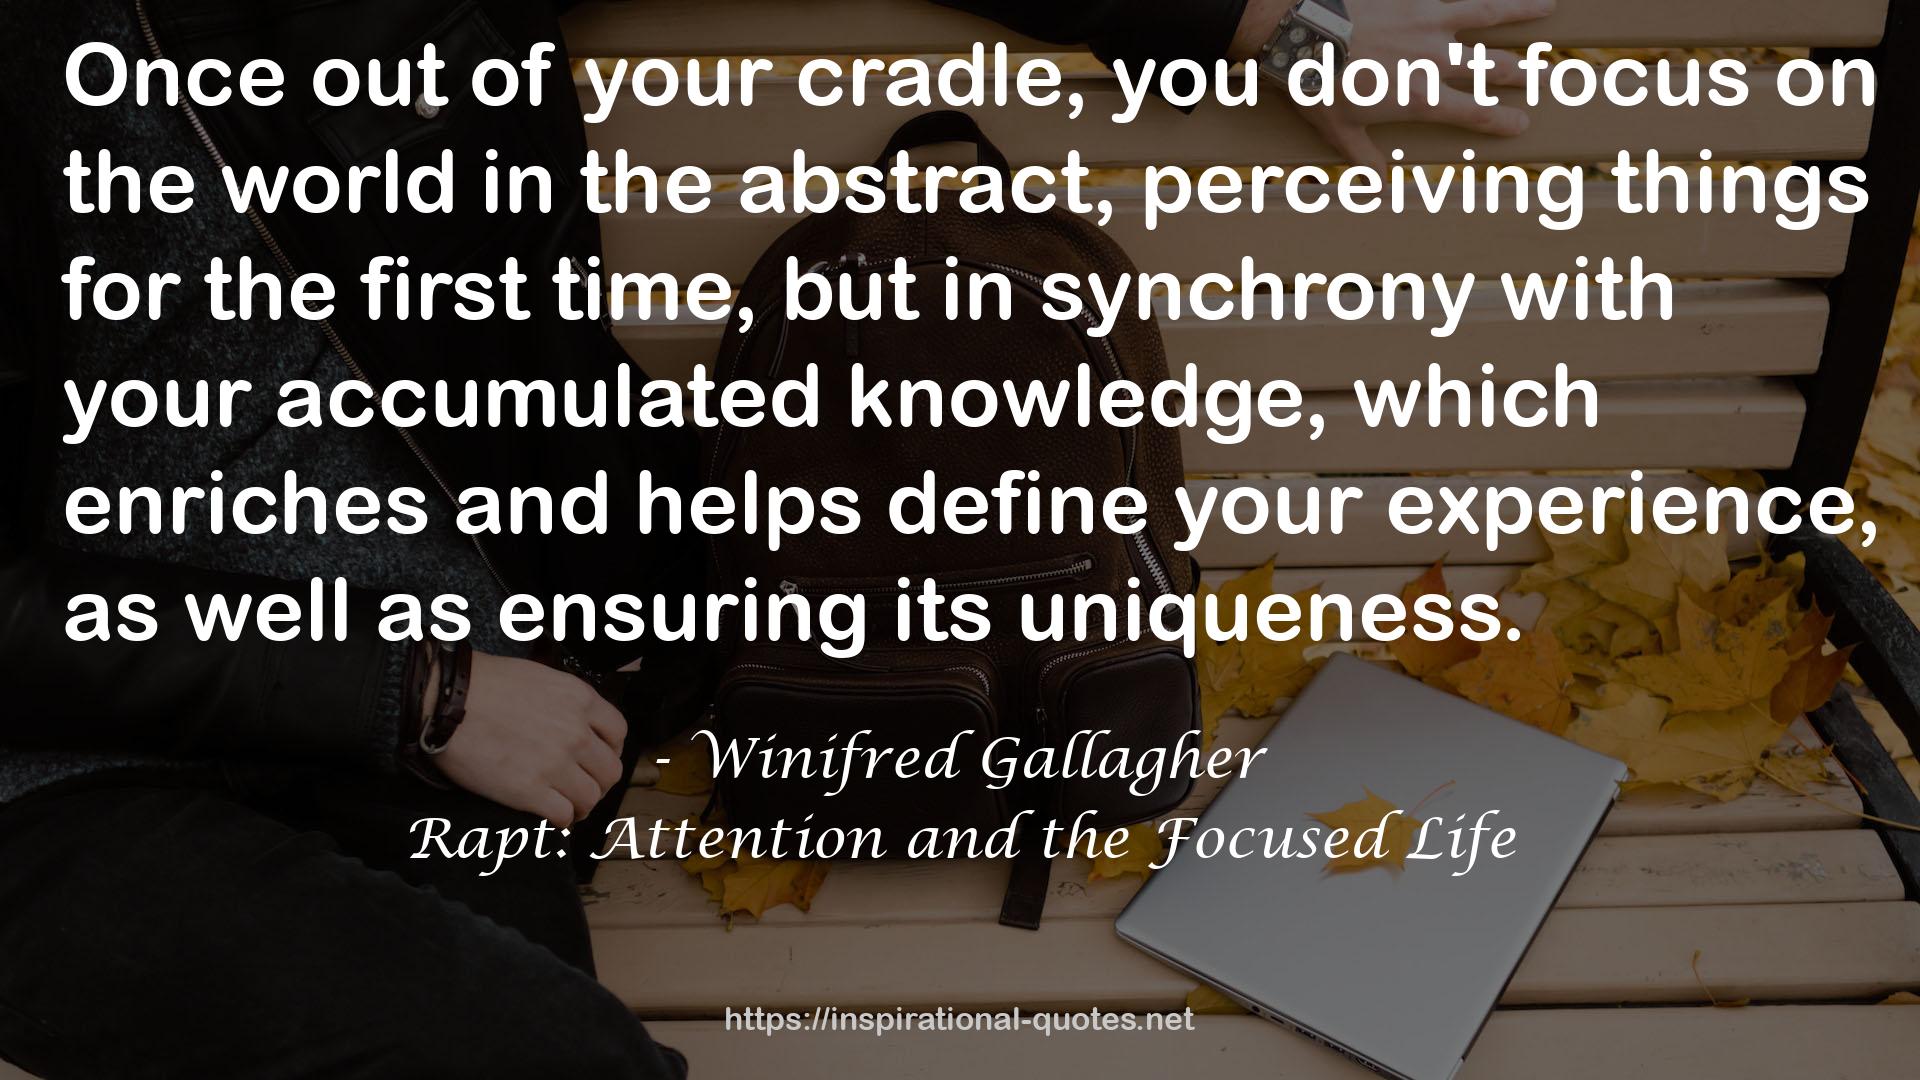 Rapt: Attention and the Focused Life QUOTES